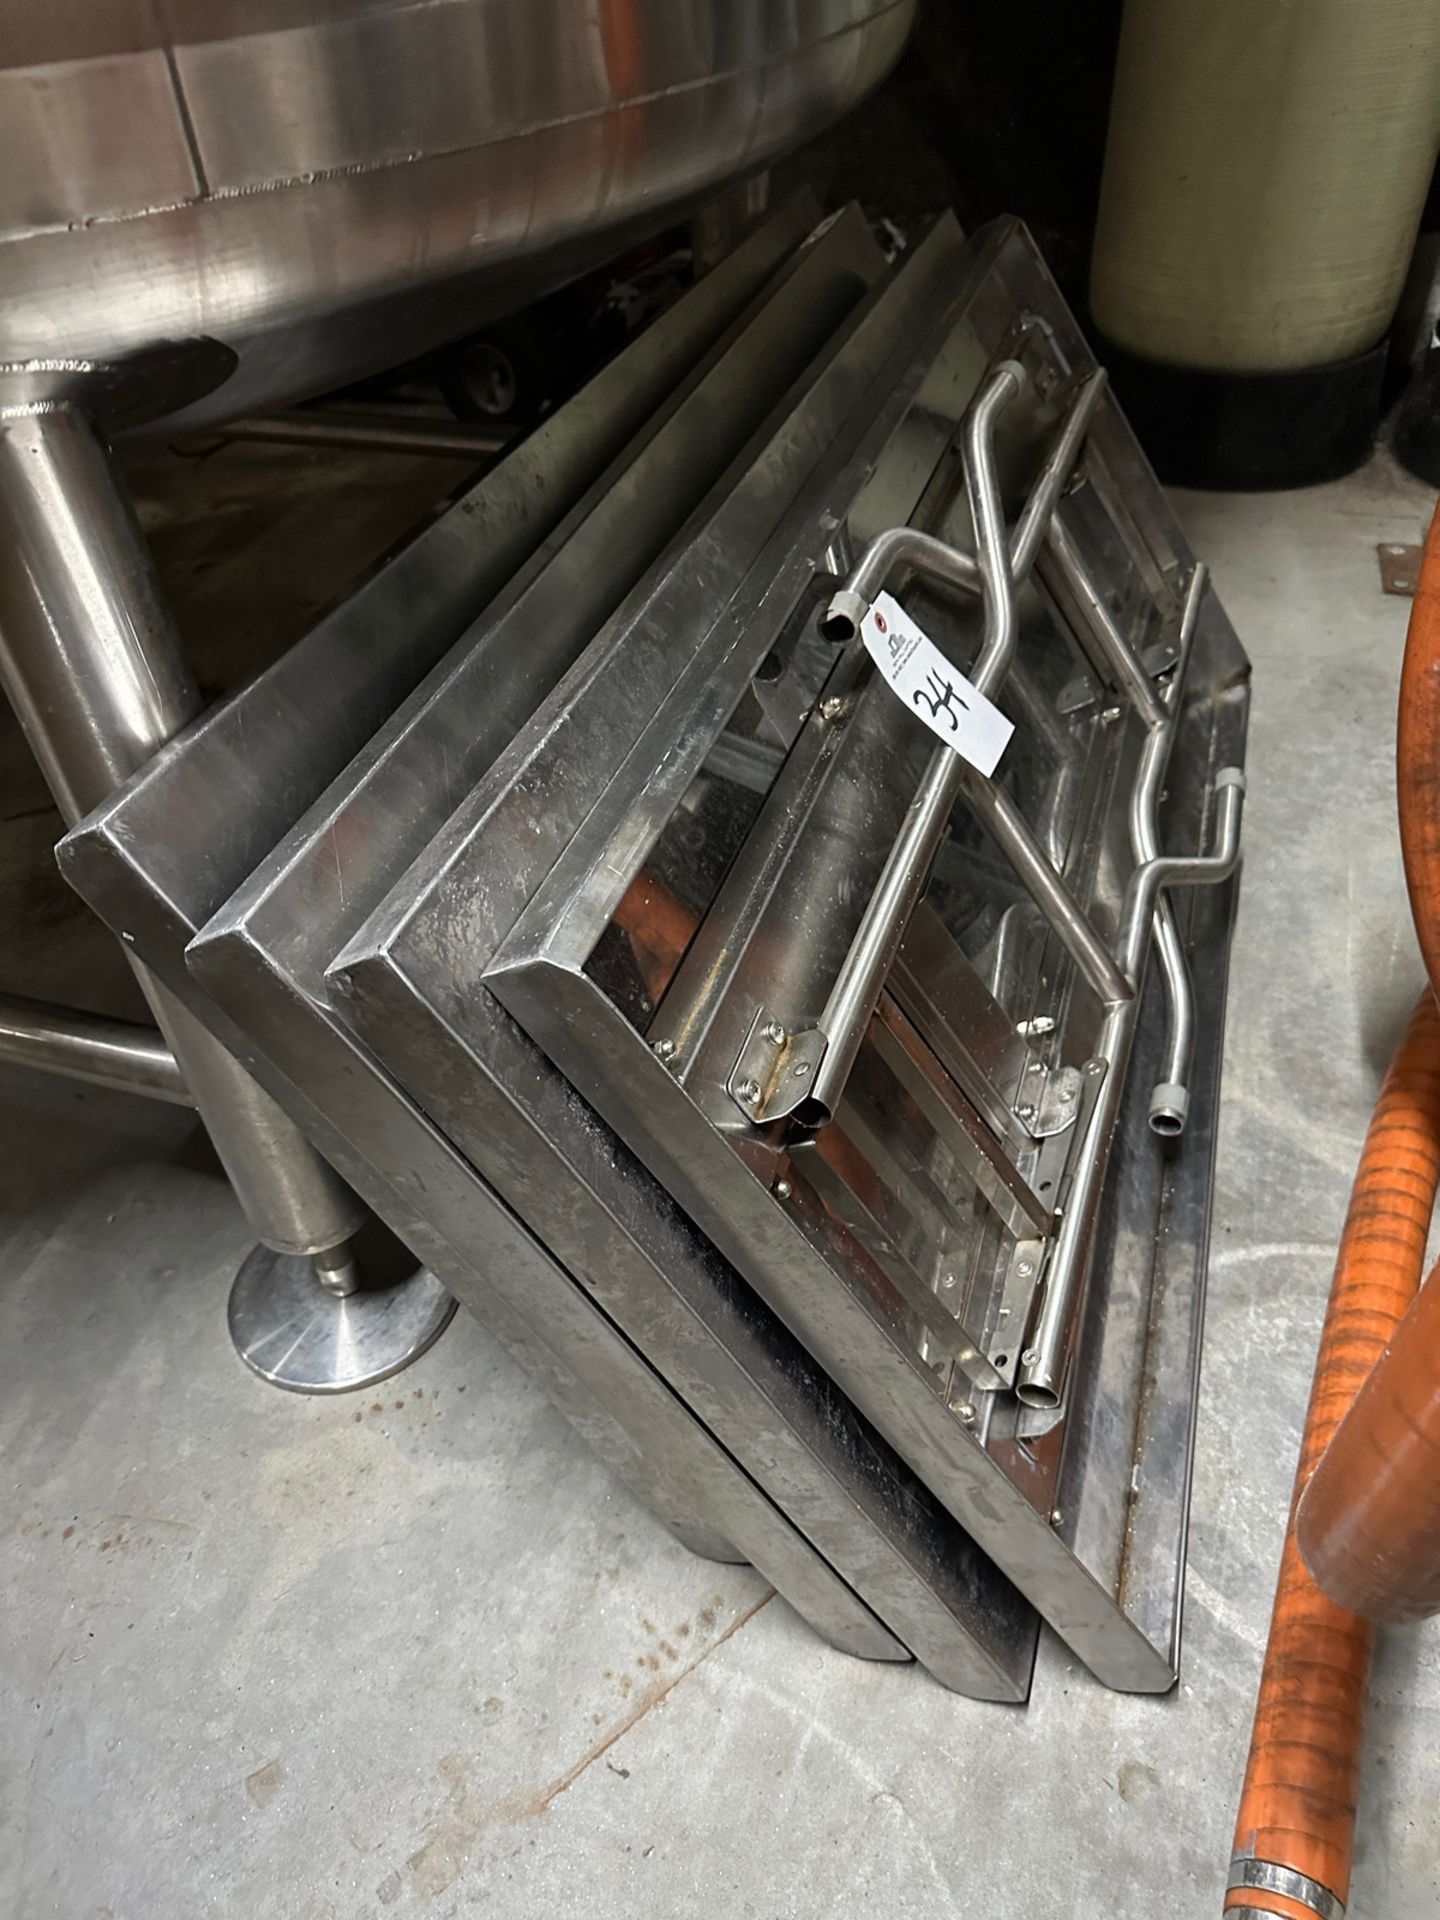 Lot of (5) Regency Stainless Steel Folding Tables (Approx. 2' x 4') | Rig Fee $25